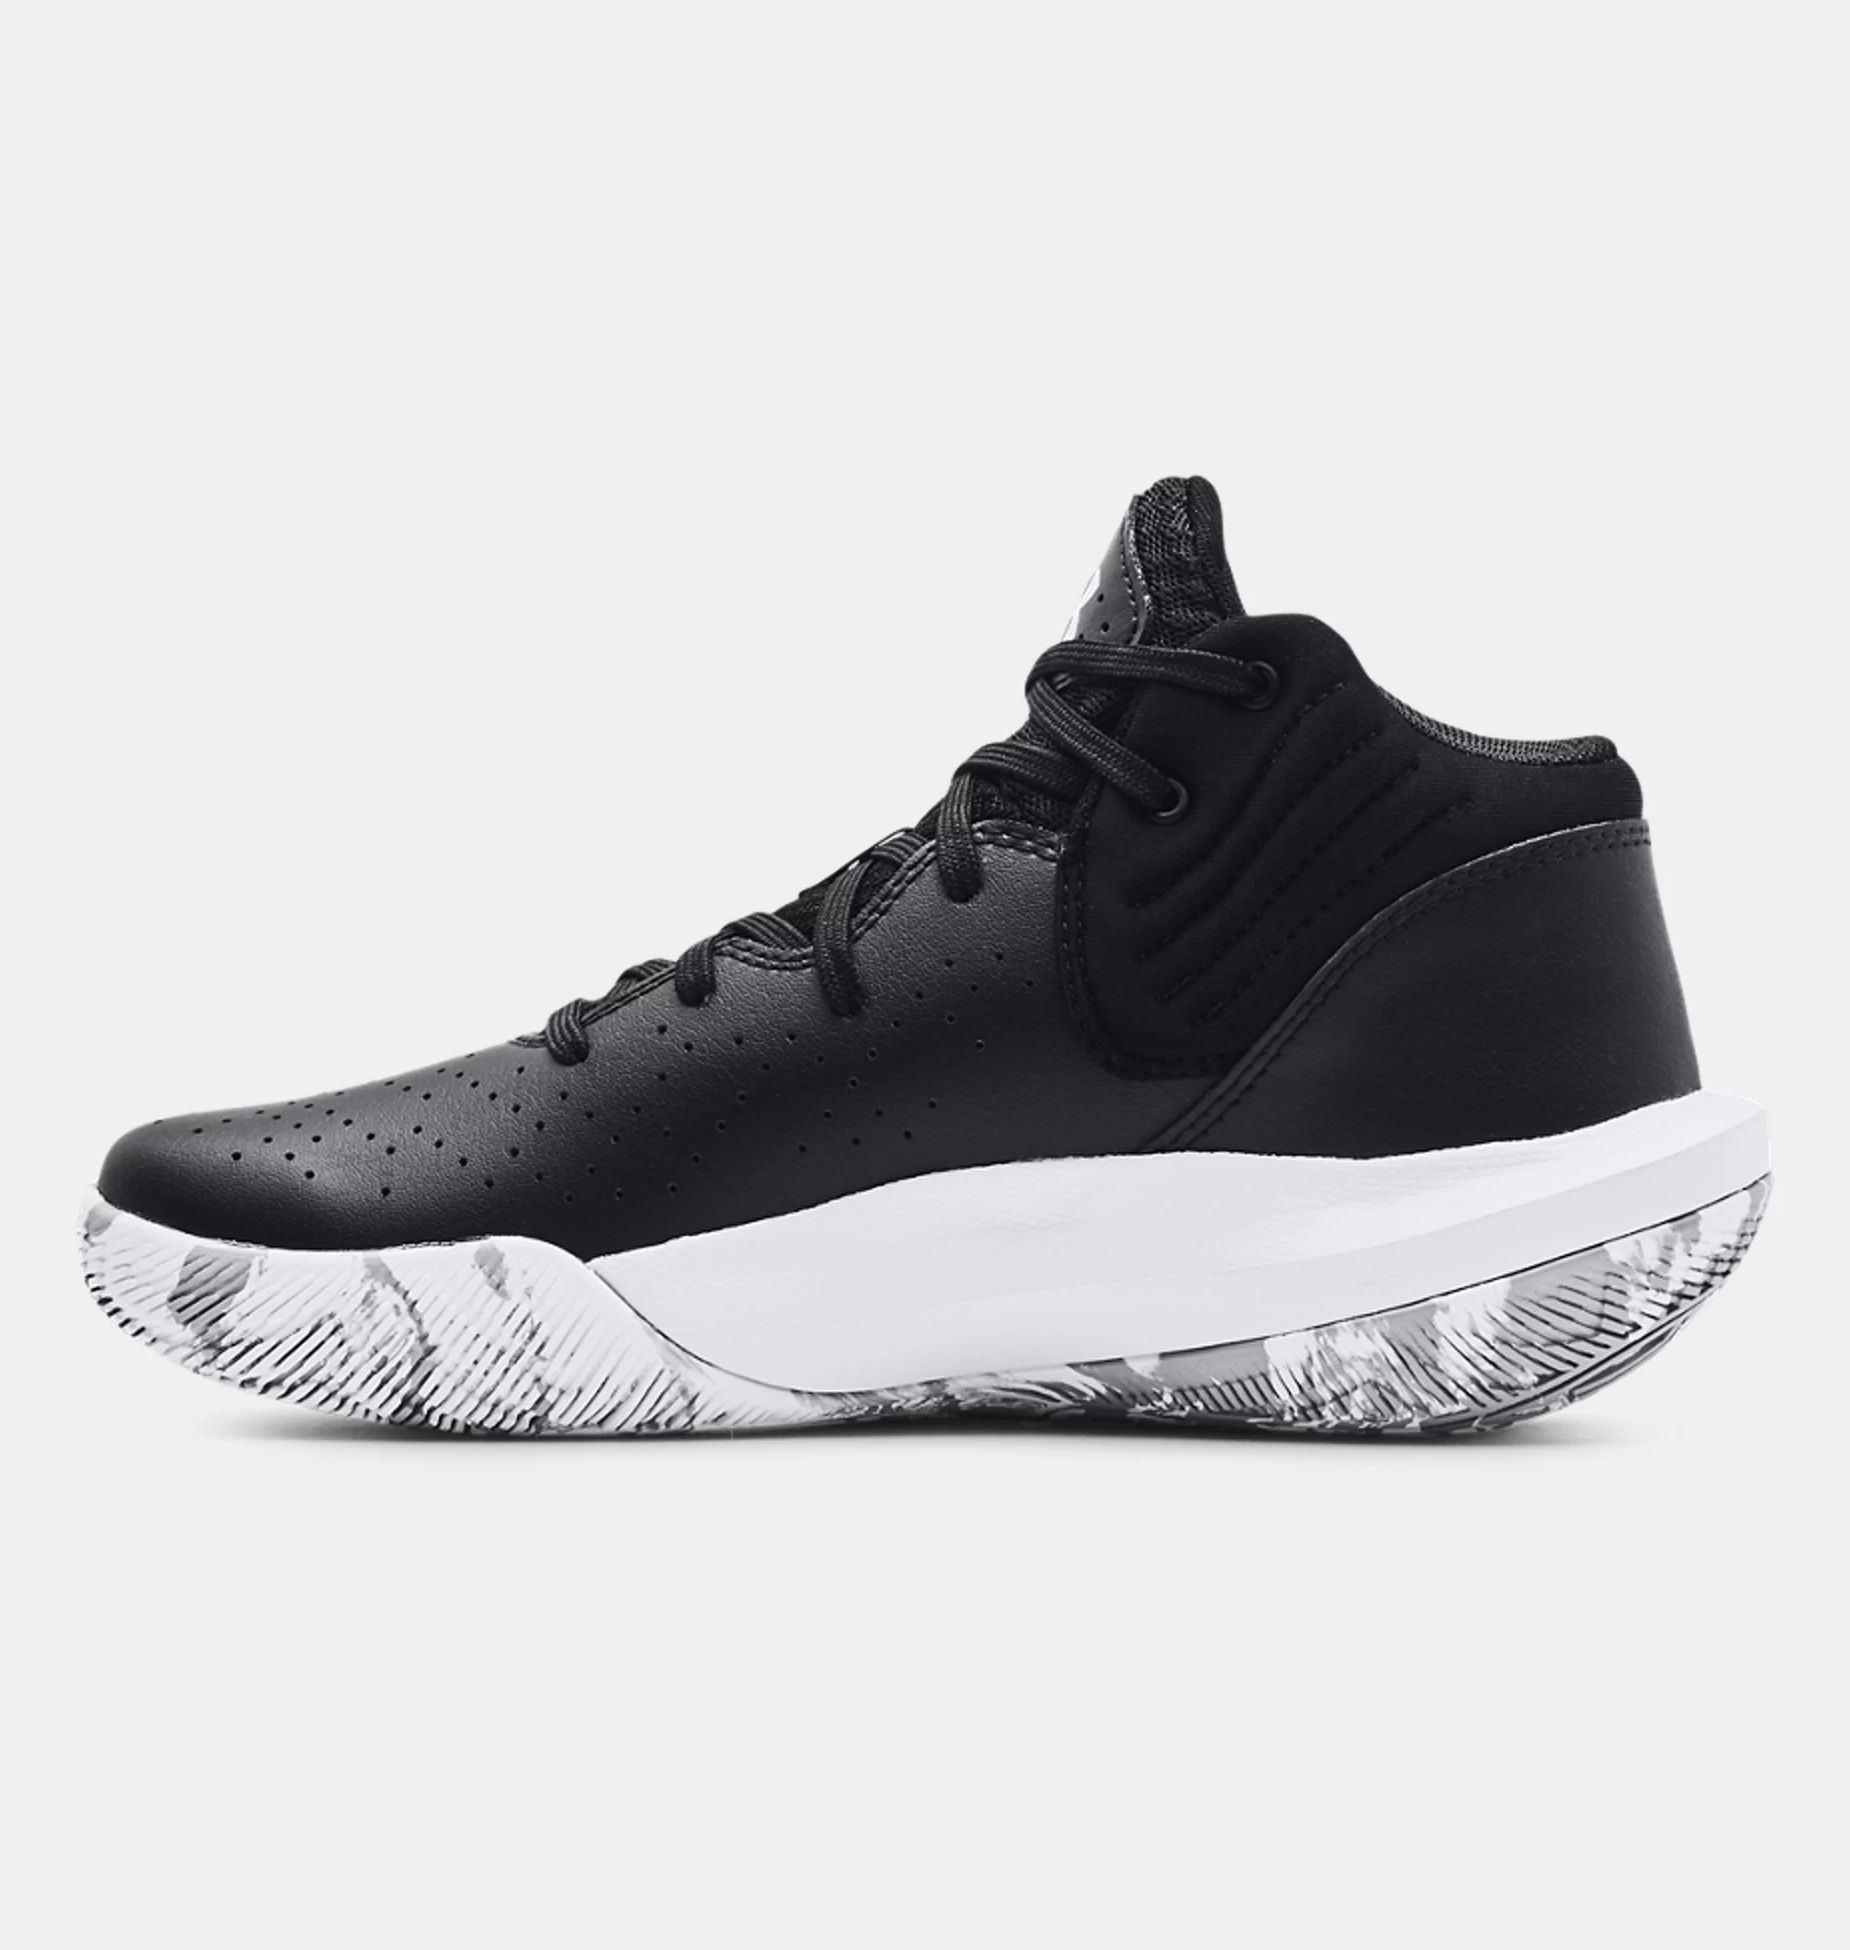 Basketball Shoes -  under armour Jet 21 Basketball Shoes